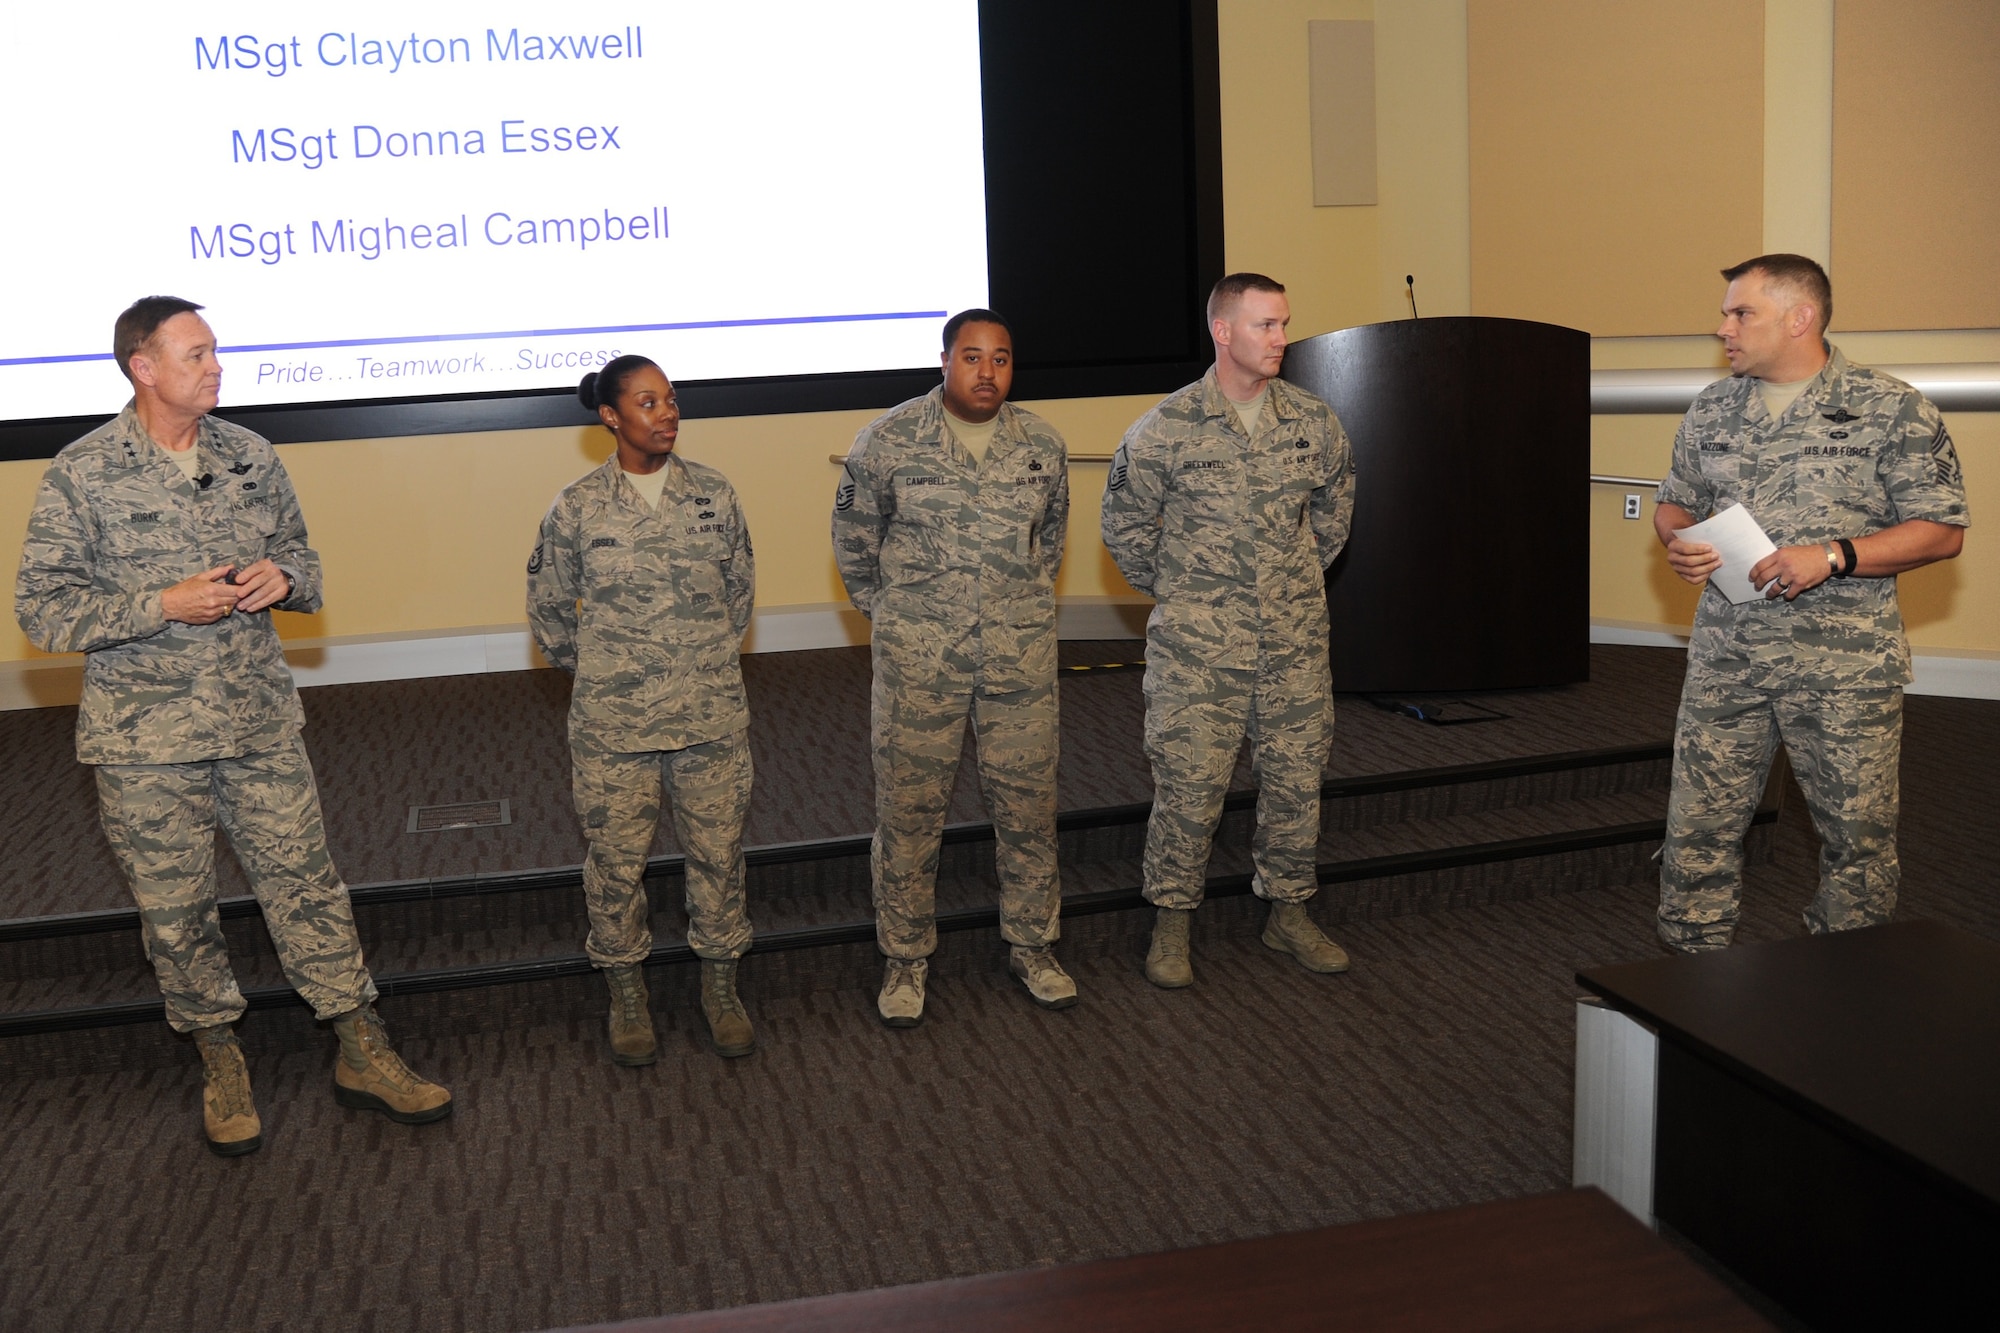 Air Force District of Washington Commander Maj. Gen. Darryl Burke and CMSgt. Tommy Mazzone, AFDW Command Chief, recognize MSgt. Donna Essex, MSgt Migheal Campbell and MSgt. Clayton Maxwell for their support of the 2016 SNCO Induction Ceremony during the AFDW Commander's Call on Aug. 12, 2016. The event recognized recent individual and team accomplishments while focusing on the significant challenges facing the AFDW team over the next few months. (U.S. Air Force photo/Jim Lotz)